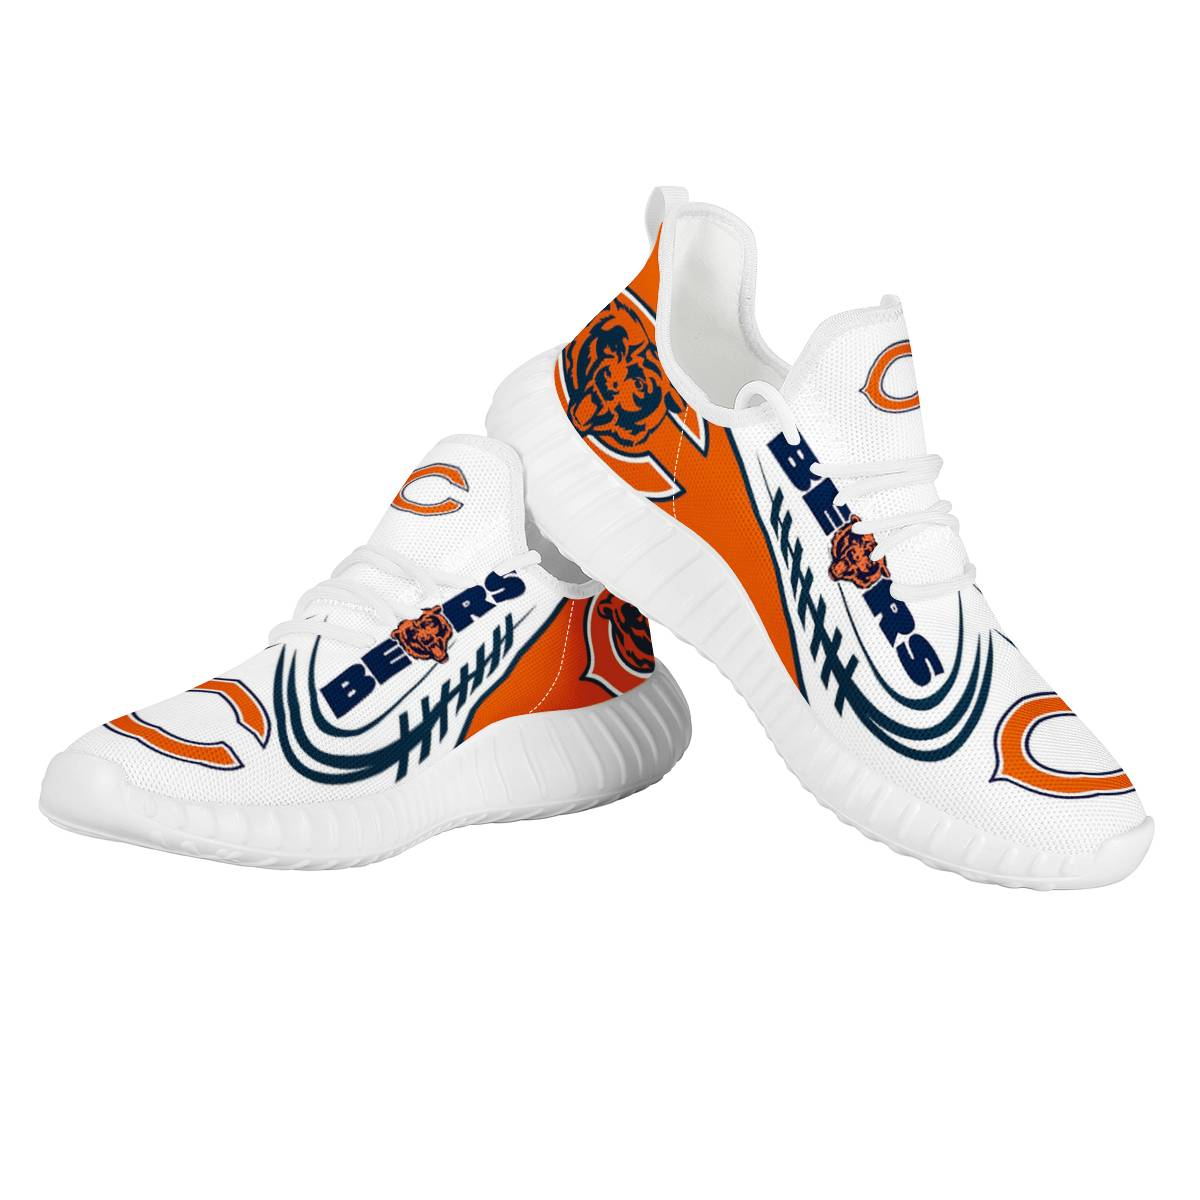 Men's Chicago Bears Mesh Knit Sneakers/Shoes 004